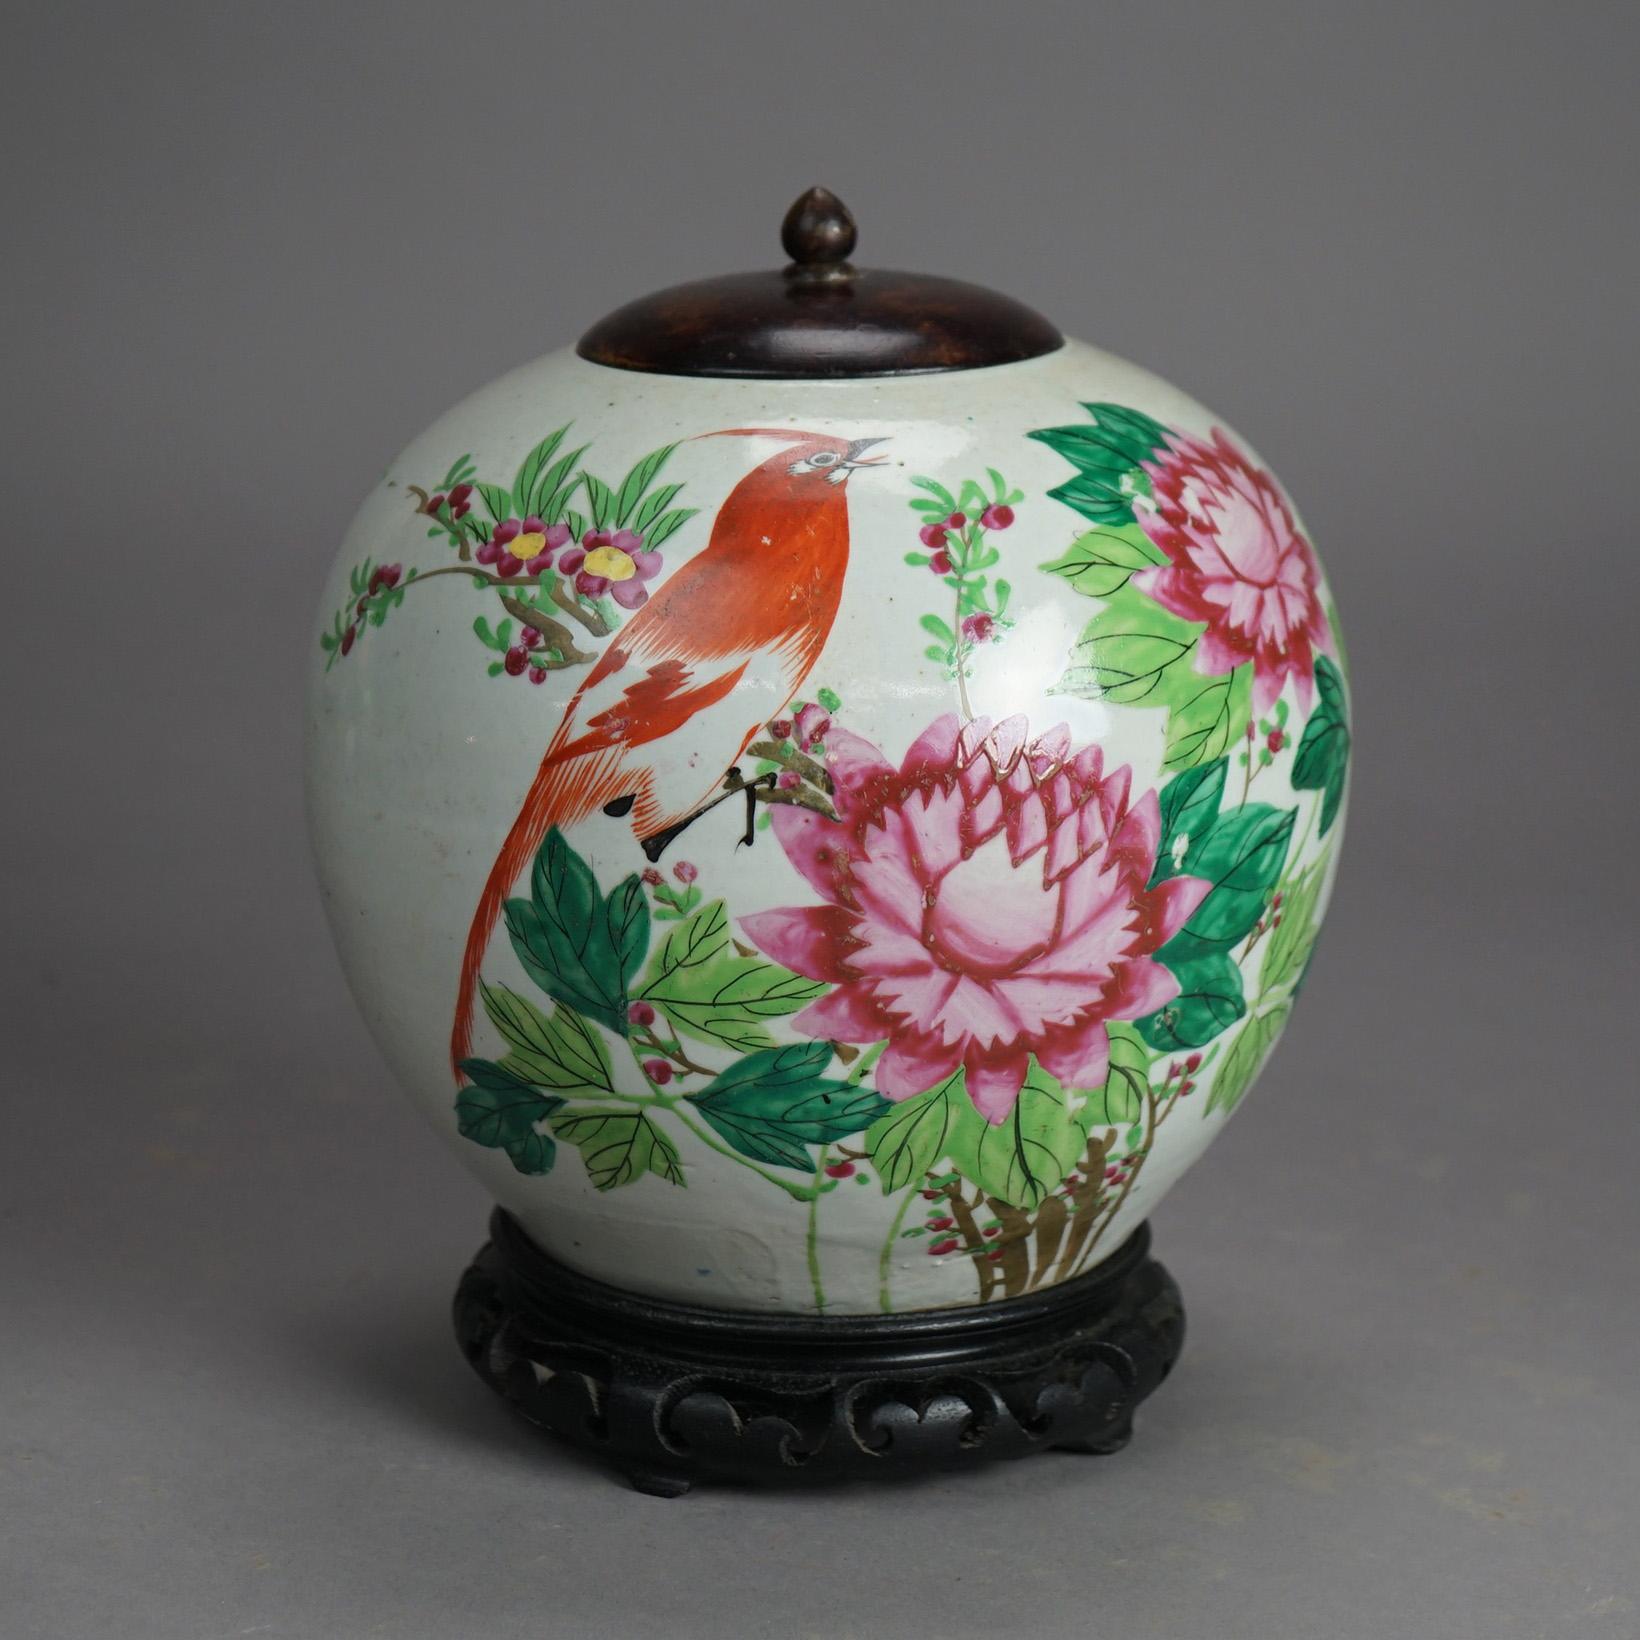 A Chinese urn offers porcelain construction with garden scene having flowers and a bird, en verso symbols; metal lid, base stamp and raised on carved hardwood base, 20th century

Measures - 10